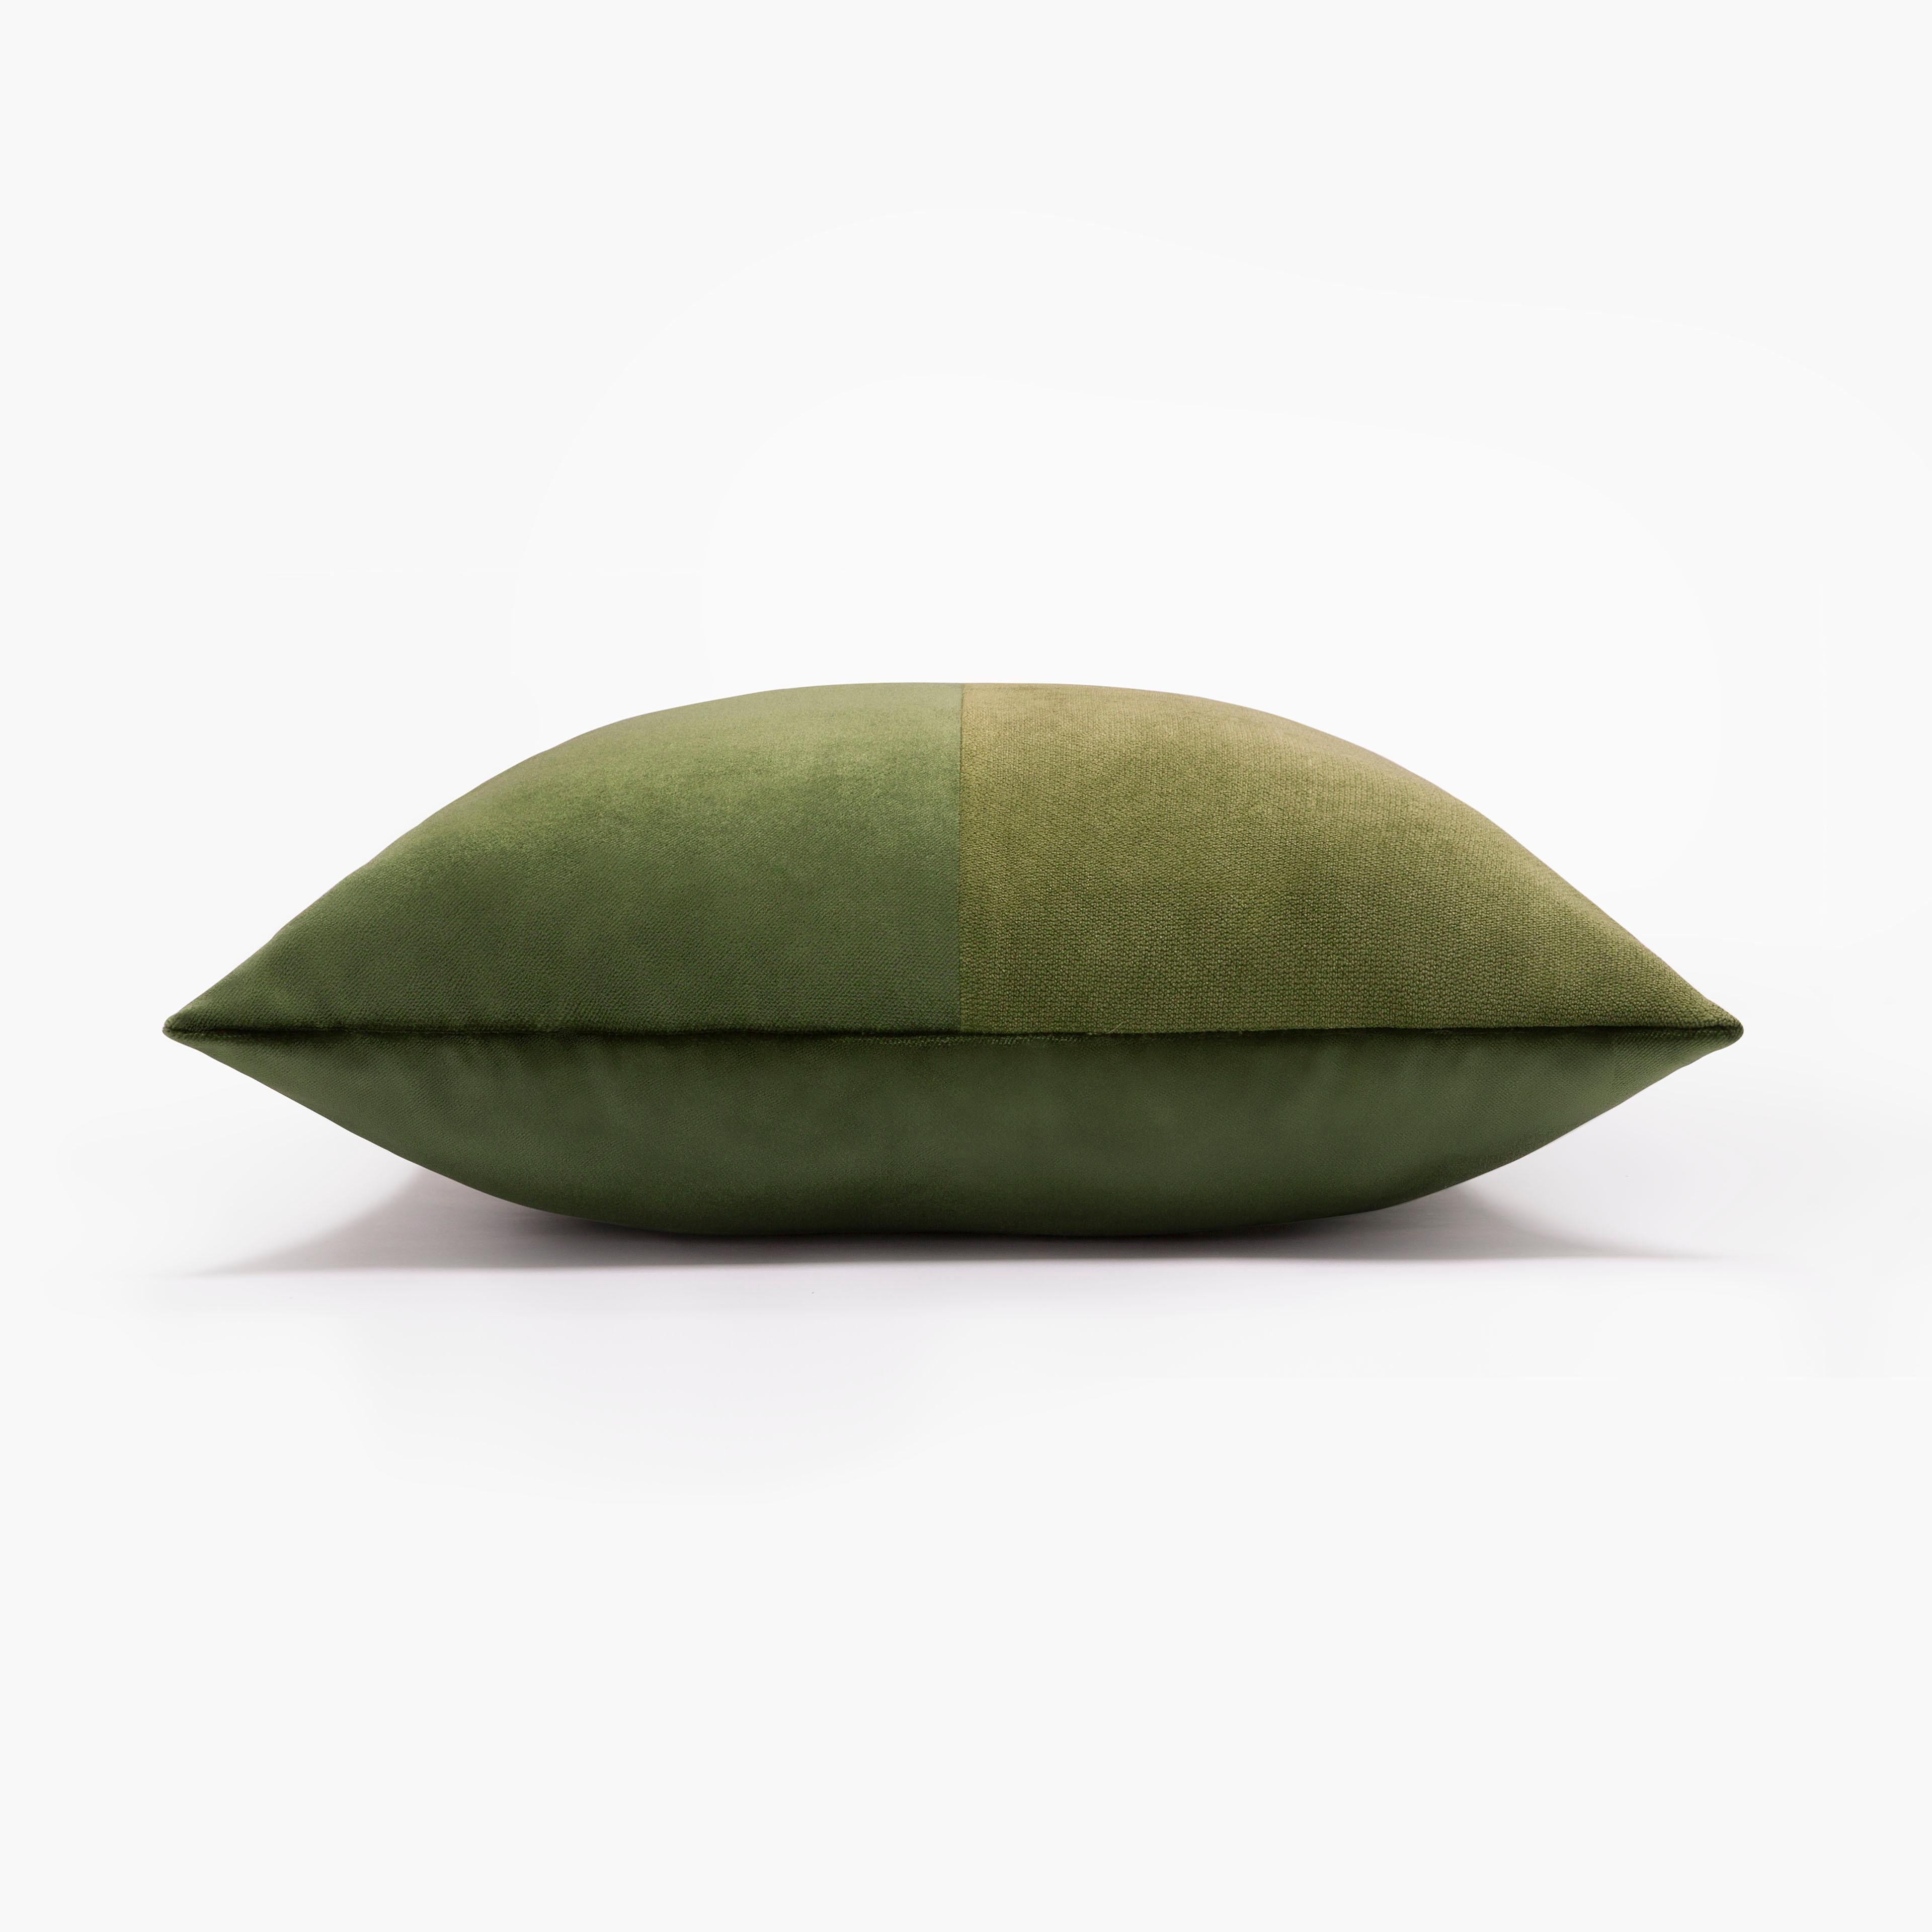 The geometrical shape of this elegant cushion is adorned with a stunning cover that is sophisticated and fresh, adding a delicate decorative accent to a modern living room. 
The contrasting color and aesthetic balance of this accent piece make it